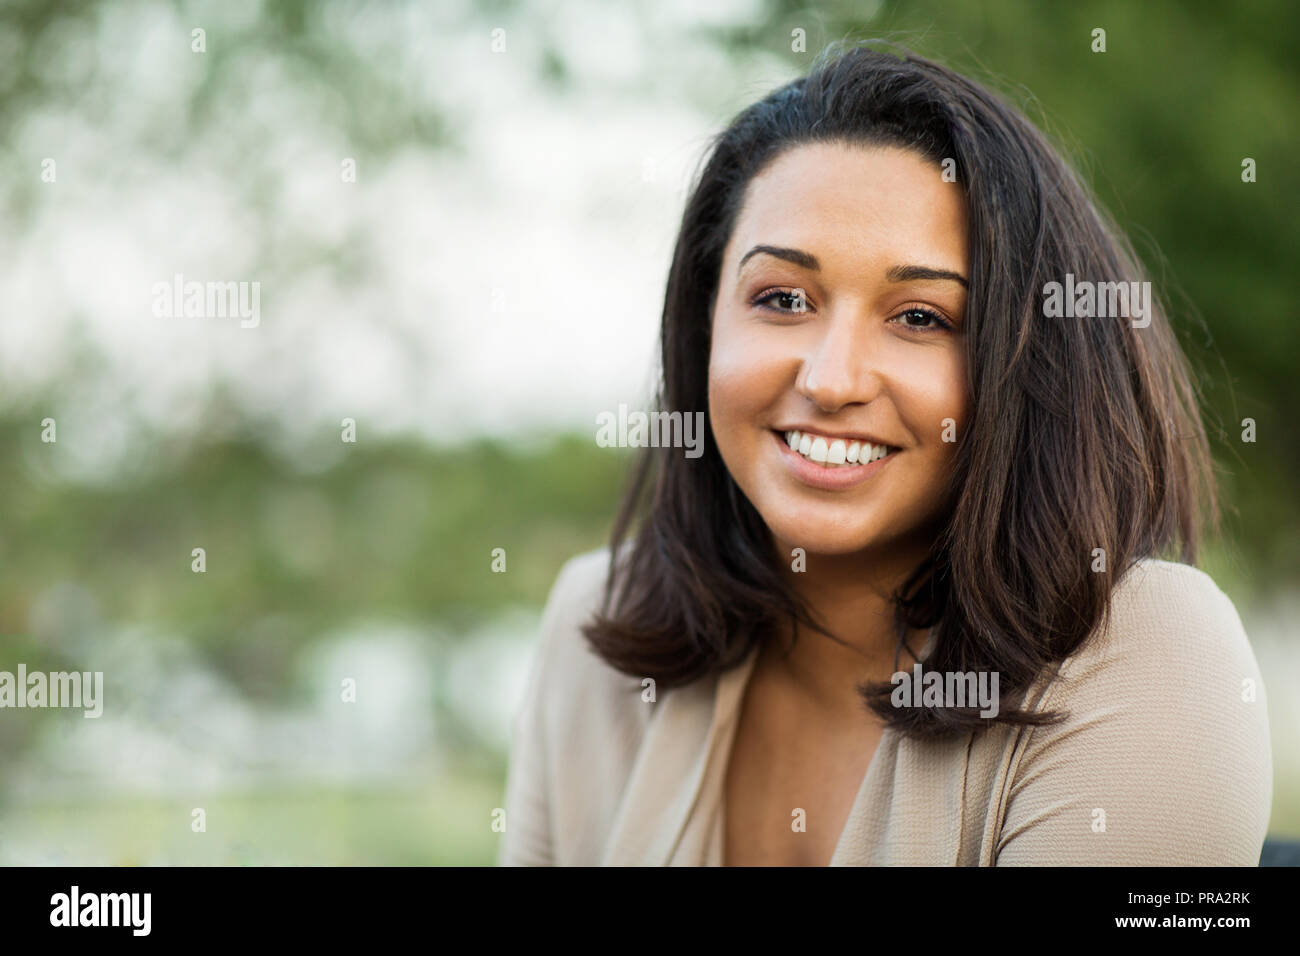 Young confident happy Hispanic woman smiling outside. Stock Photo